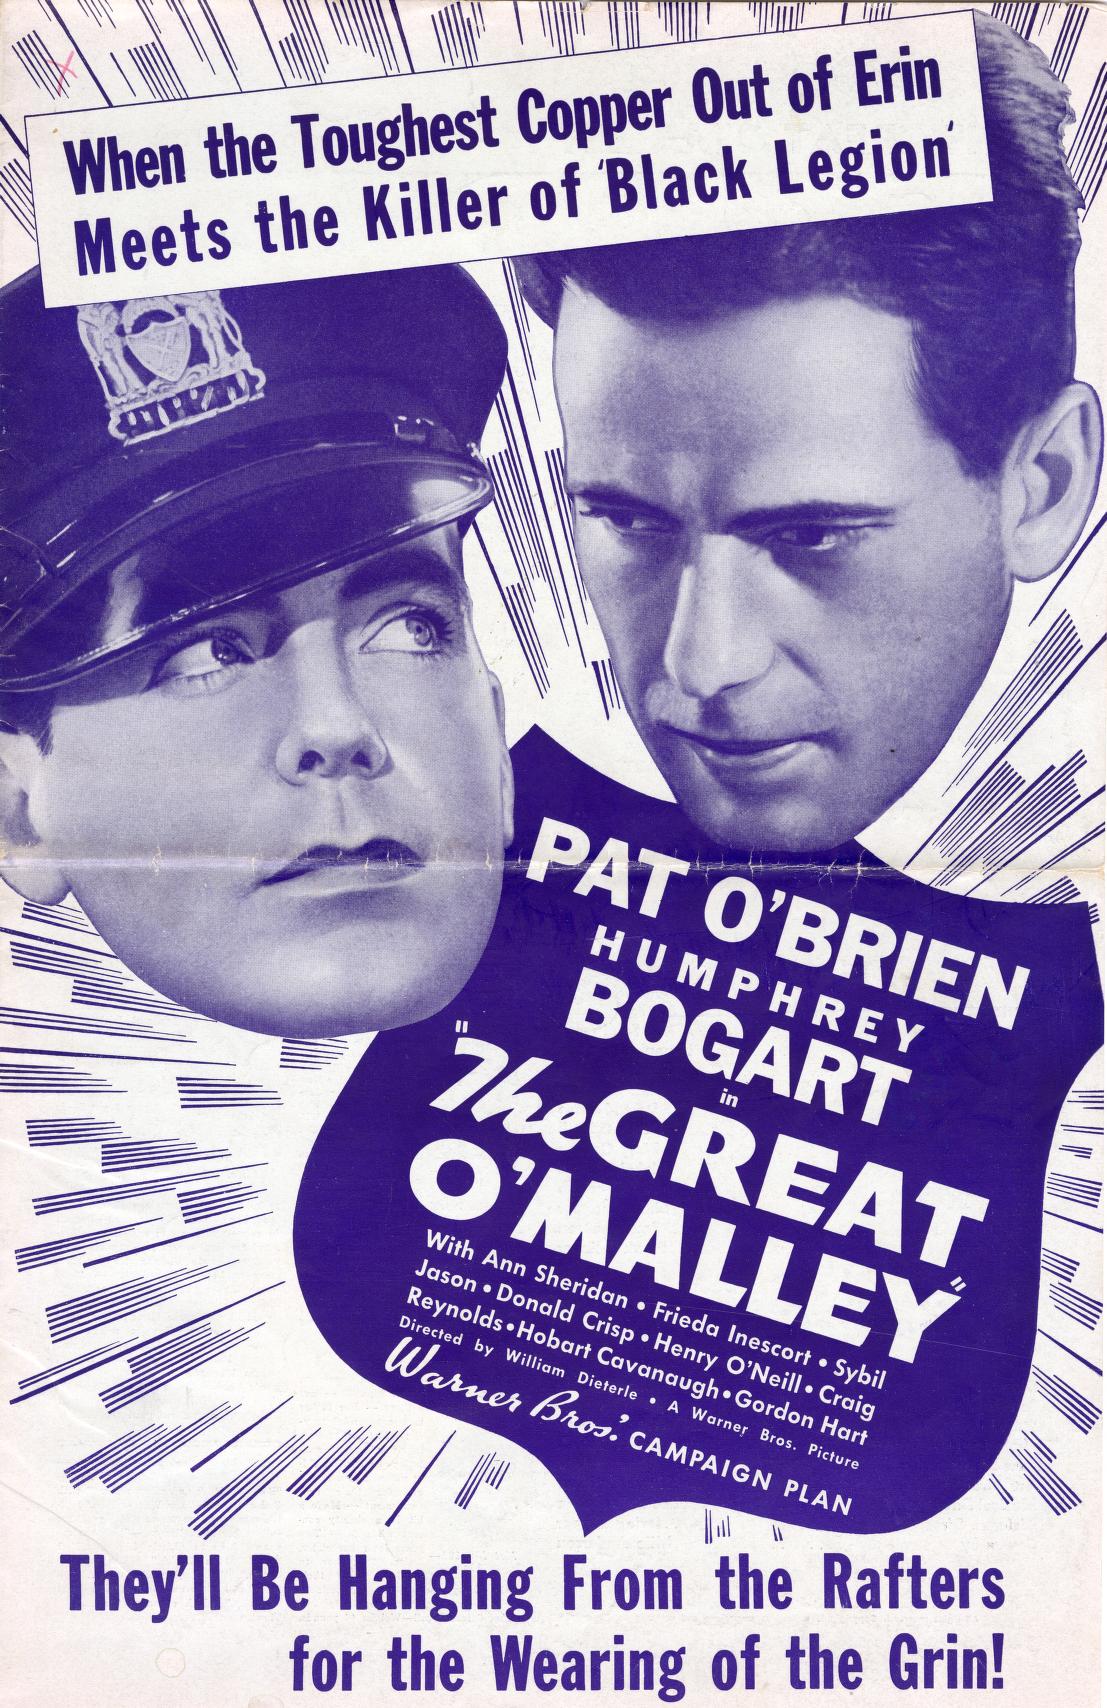 The Great OMalley (Warner Bros.)